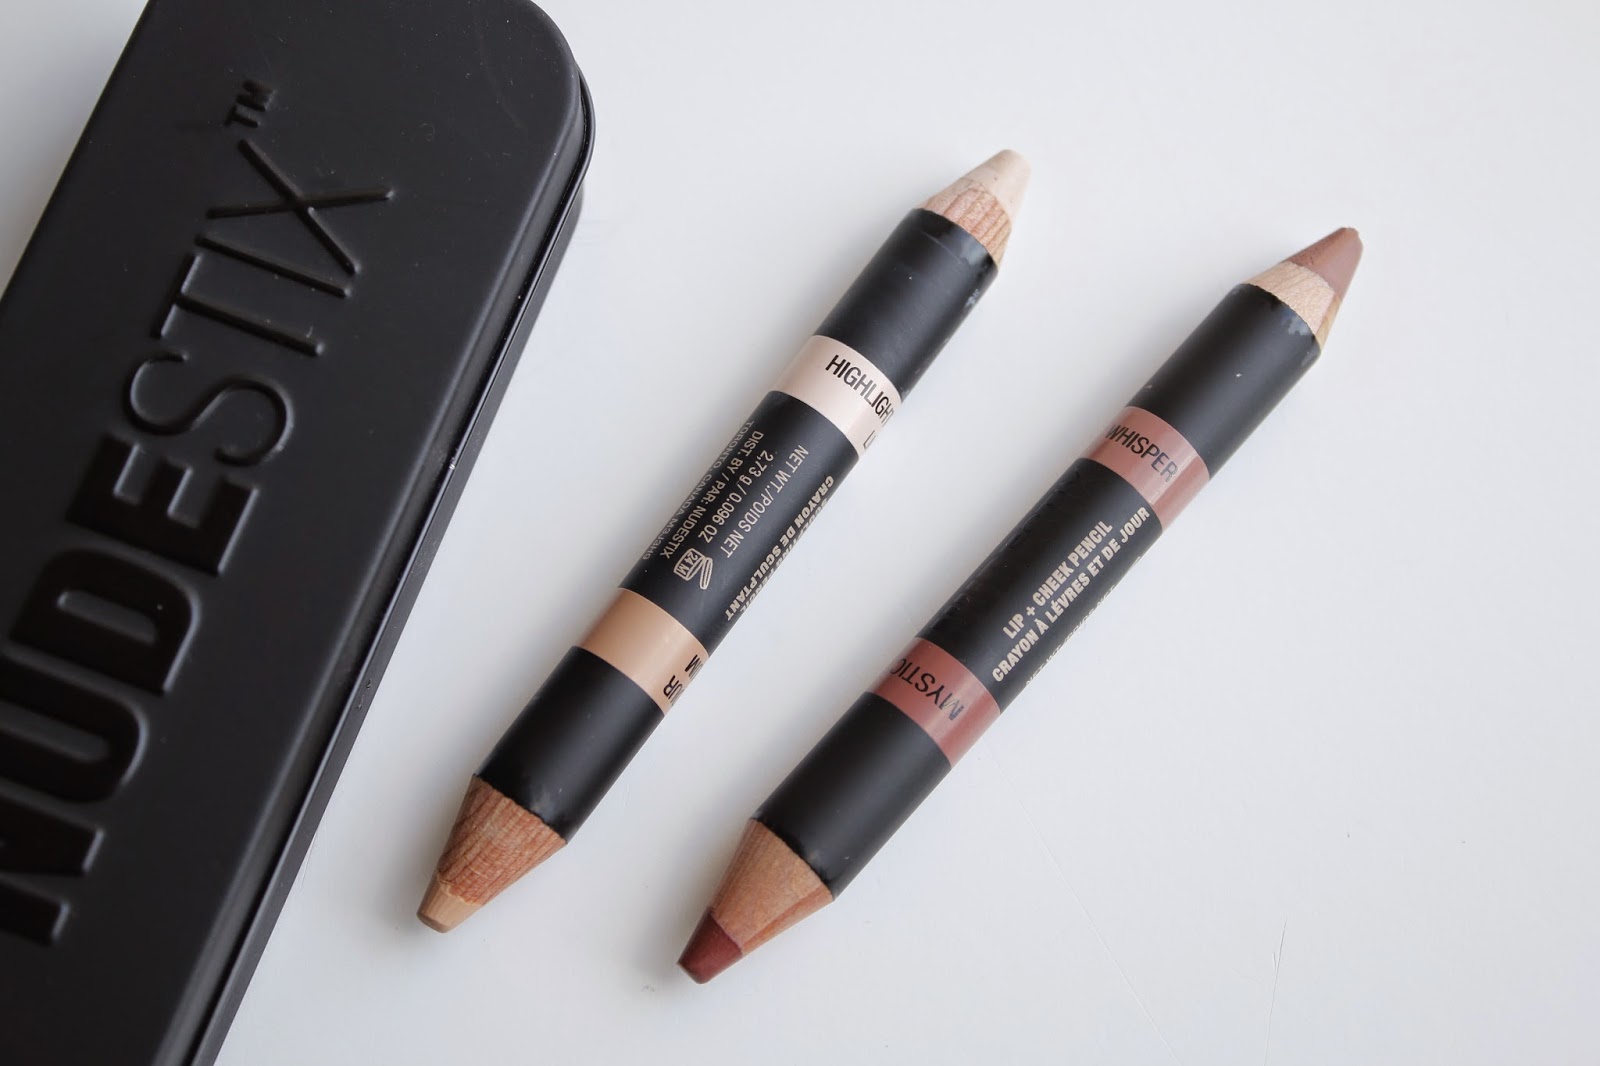 New launches from Nudestix